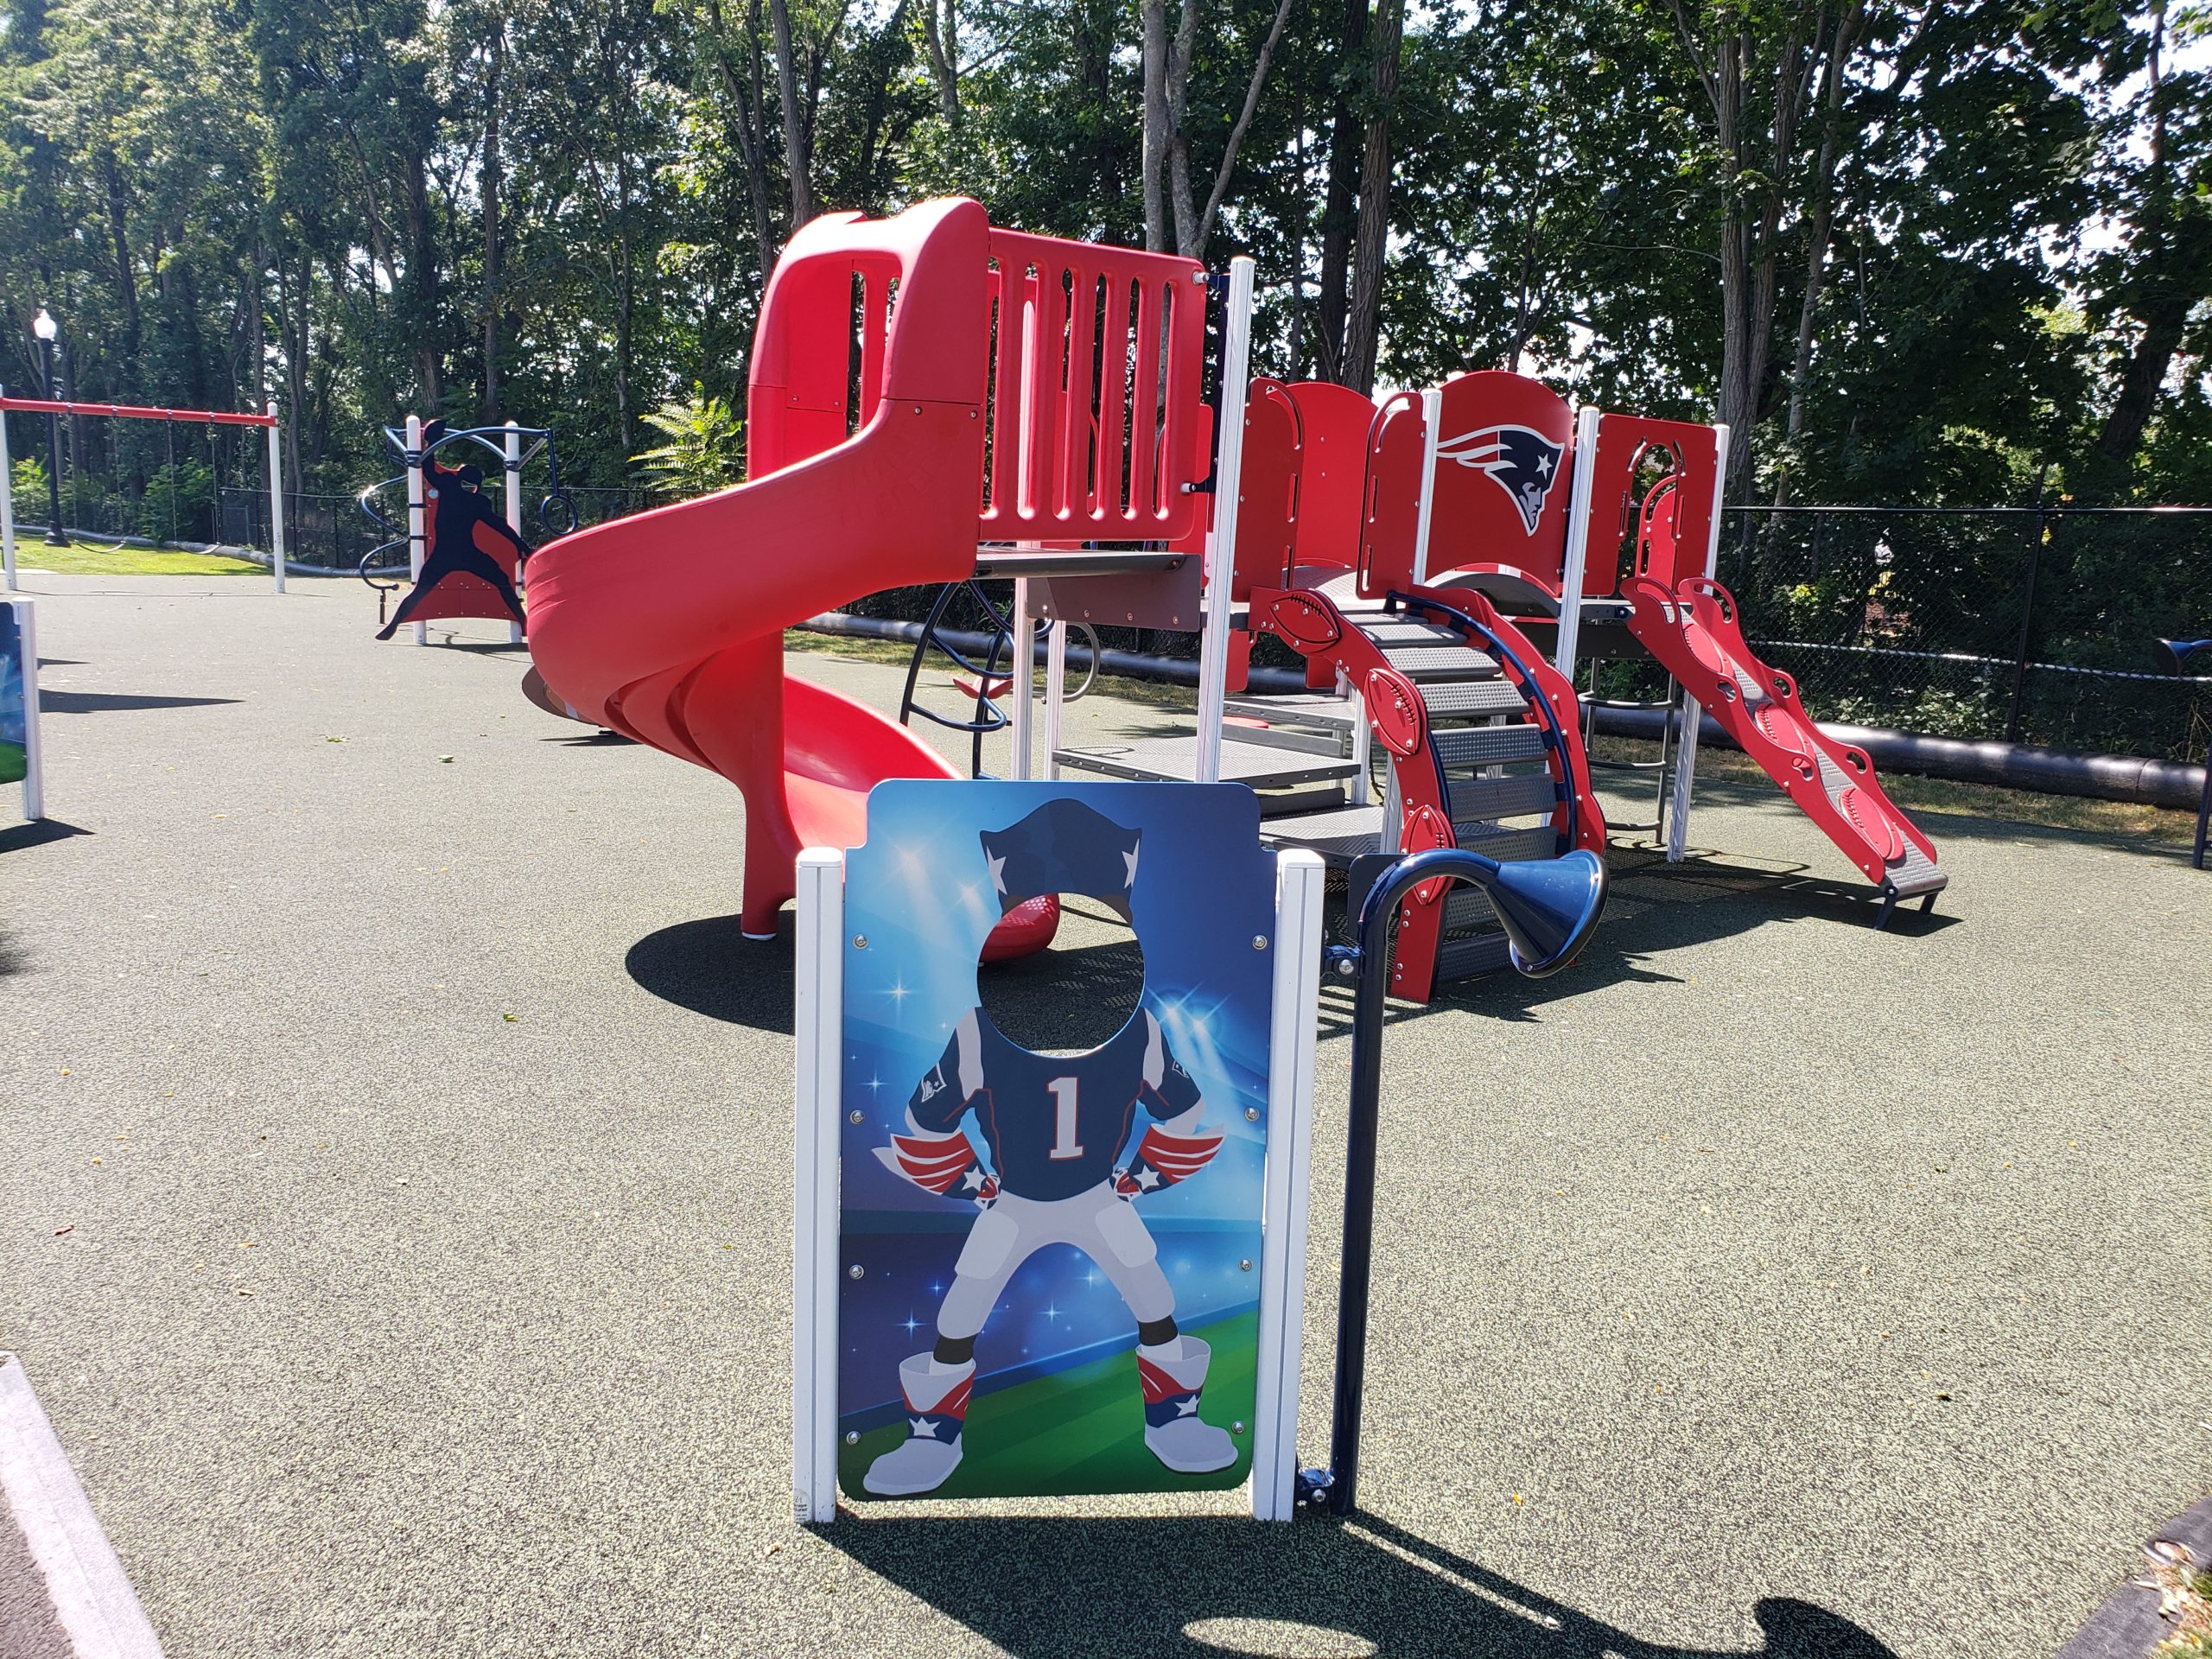 Patriot Football Themed Landscape Structures Playground using DigiFuse Panel Graphics